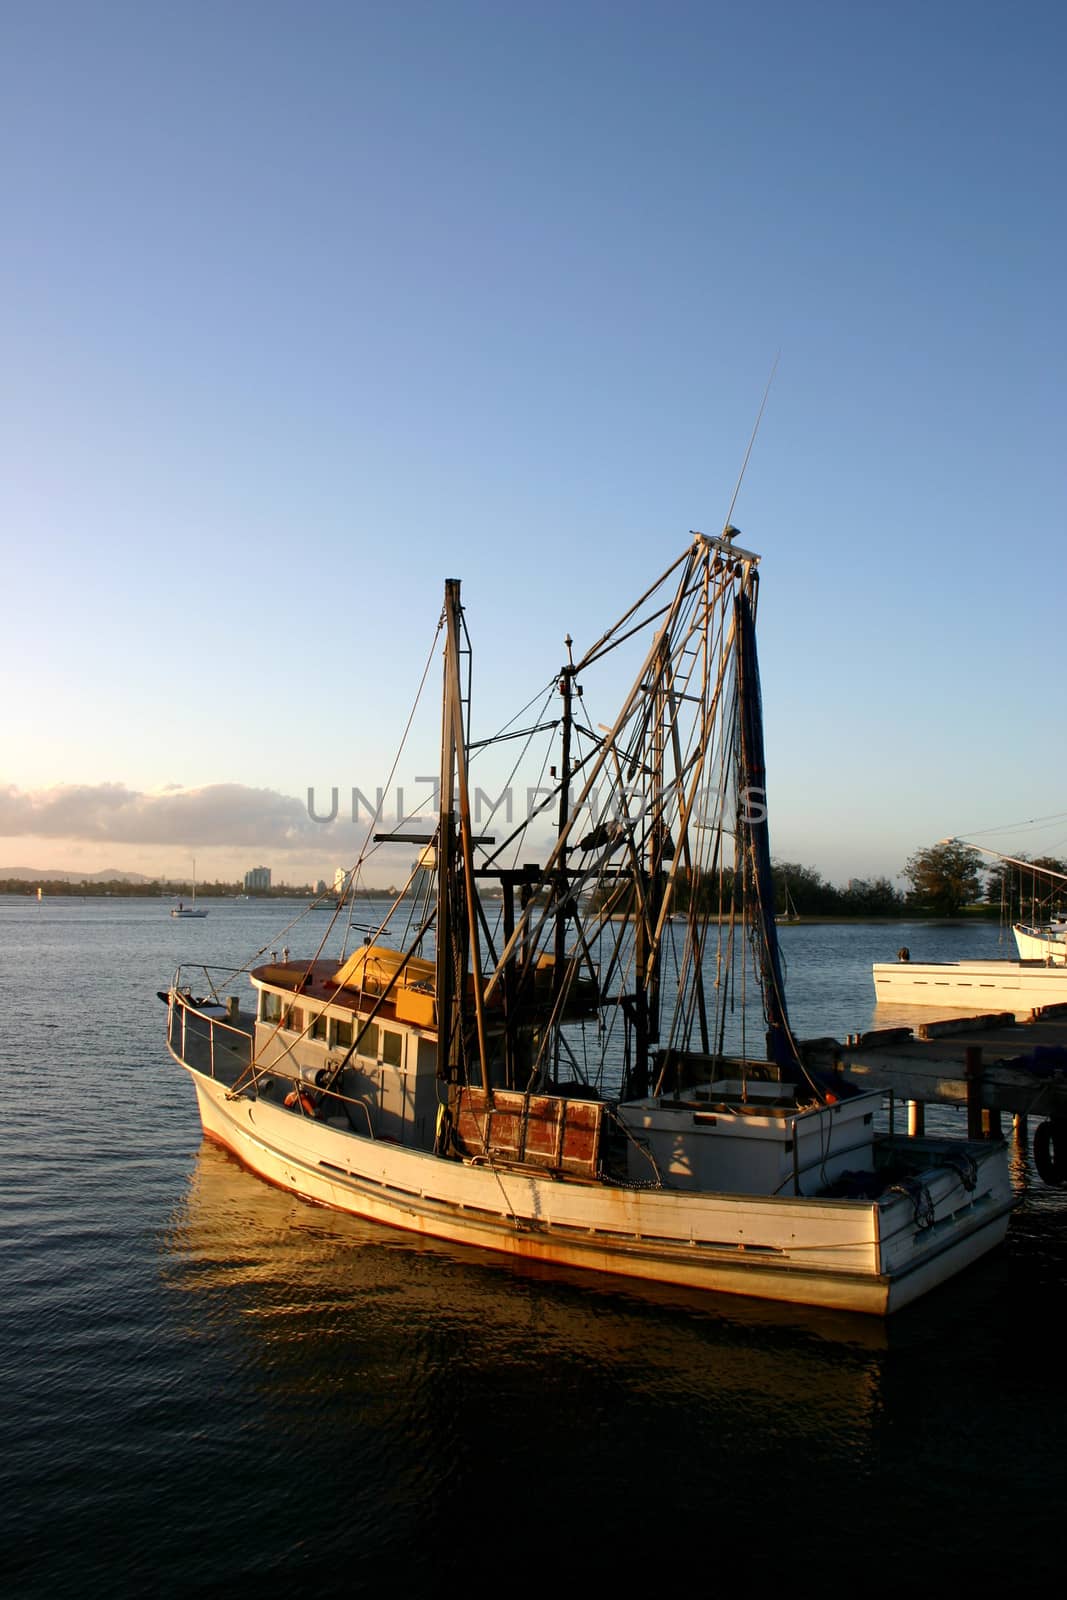 Fishing and prawn trawler at dock in the late afternoon light.